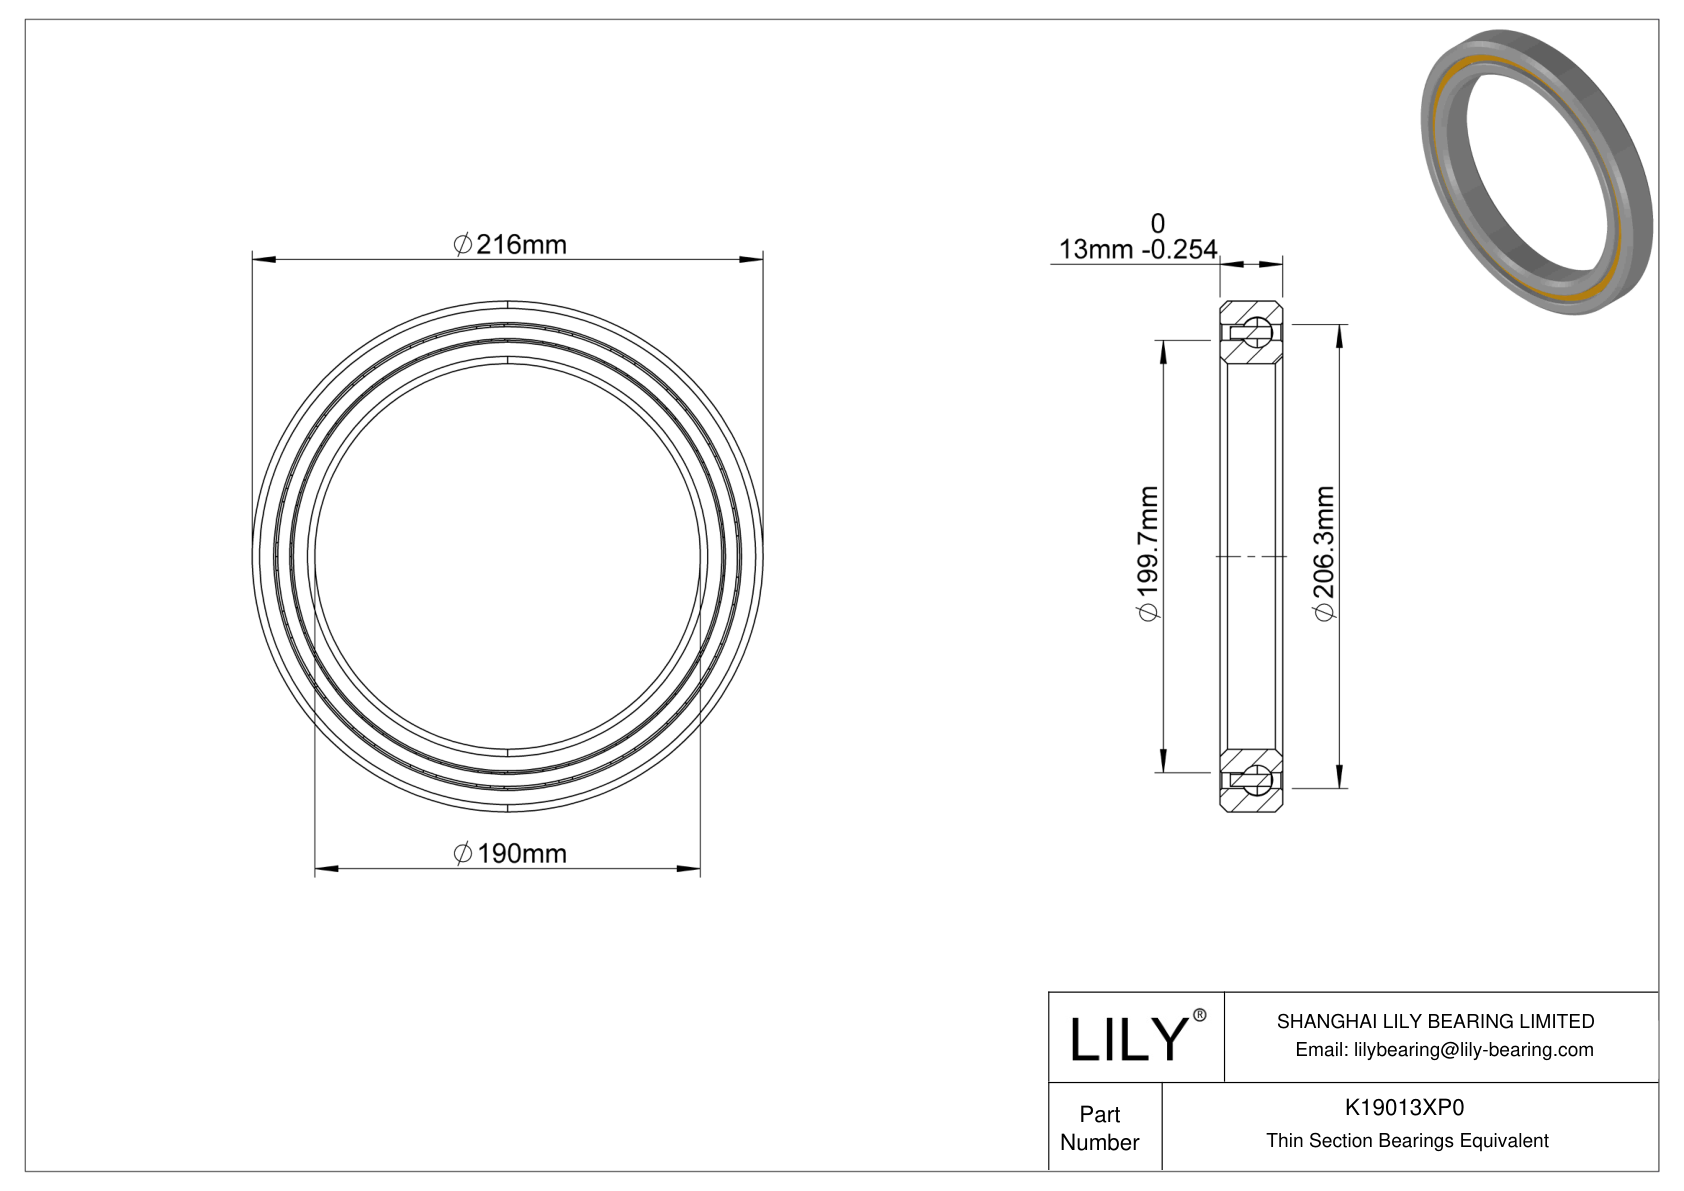 K19013XP0 Constant Section (CS) Bearings cad drawing